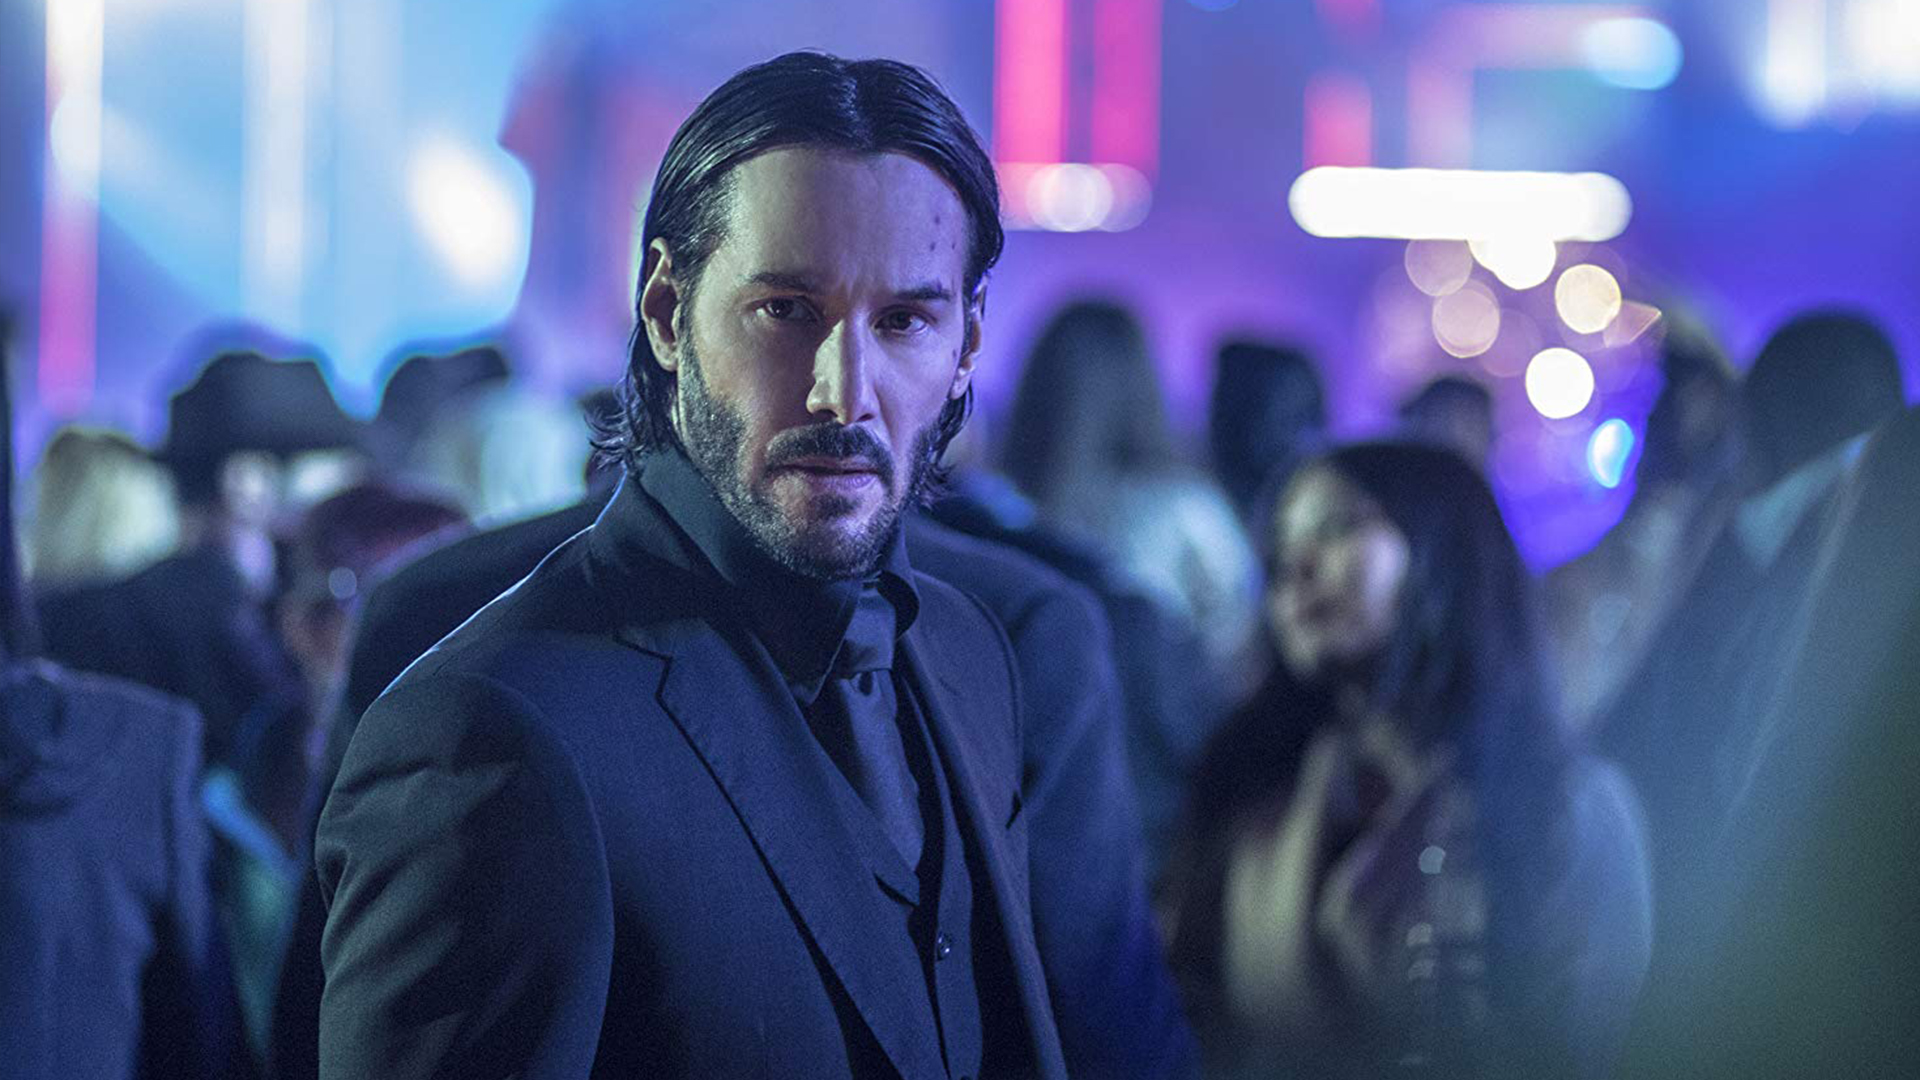 John Wick in a sharp suit is looking for someone in a neon scenery in one of his films